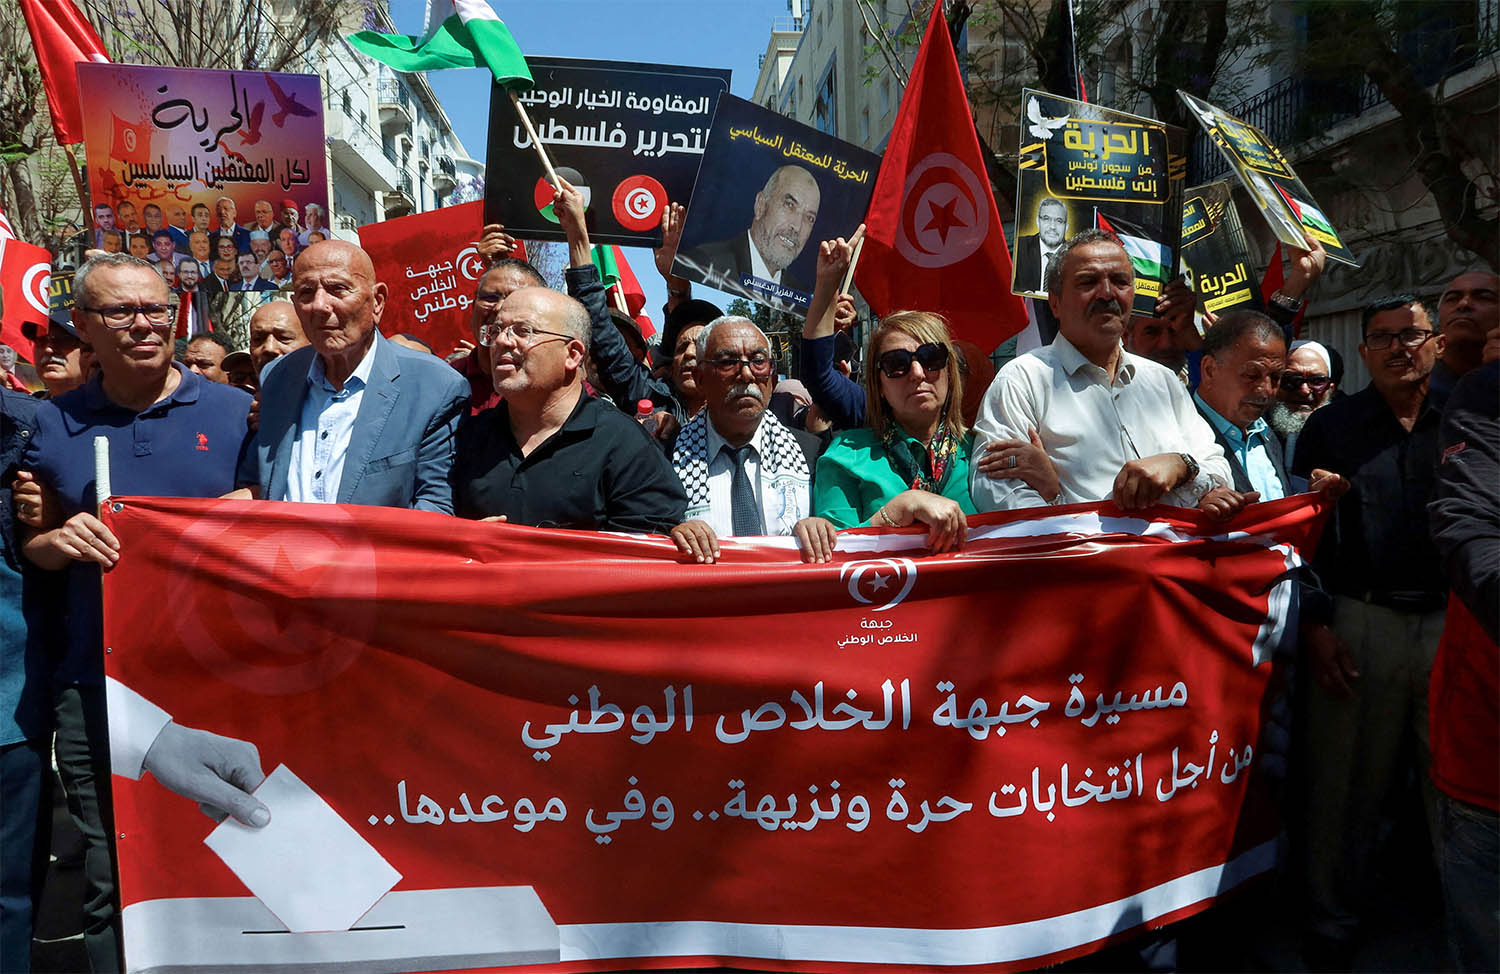 Hundreds protested in Tunis to demand the release of imprisoned journalists, activists and opposition figures